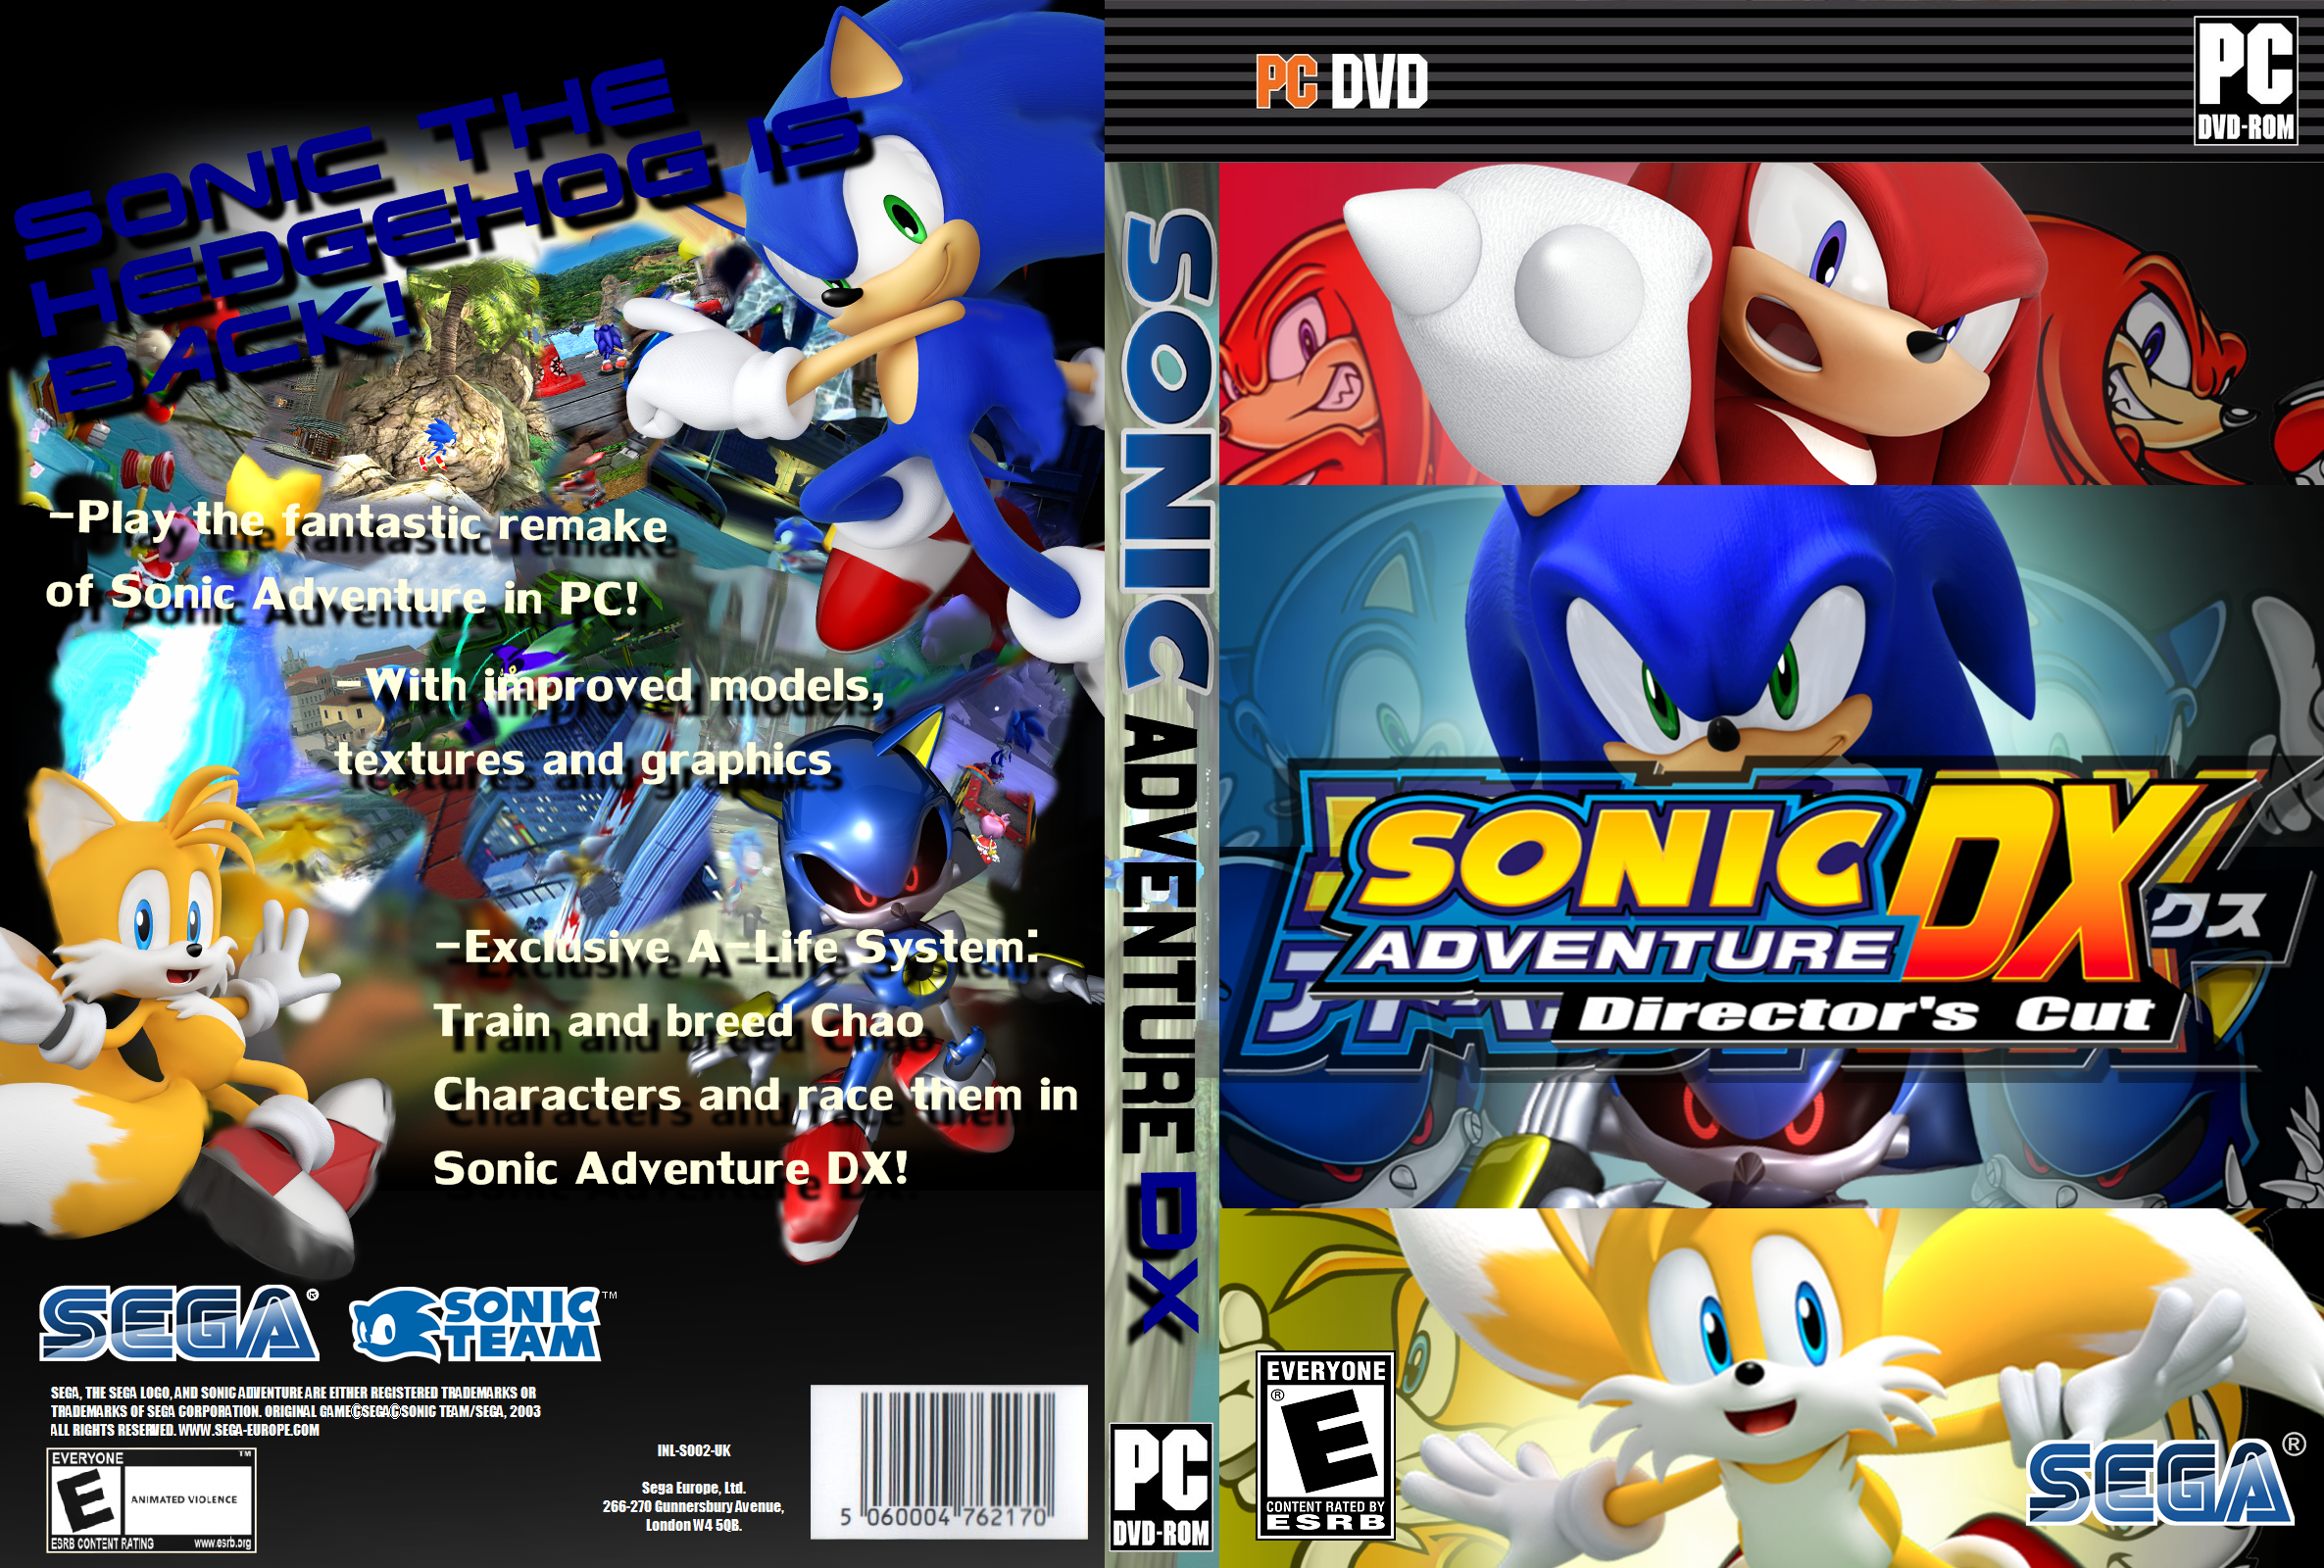 Sonic Adventure DX Director's Cut PC box cover